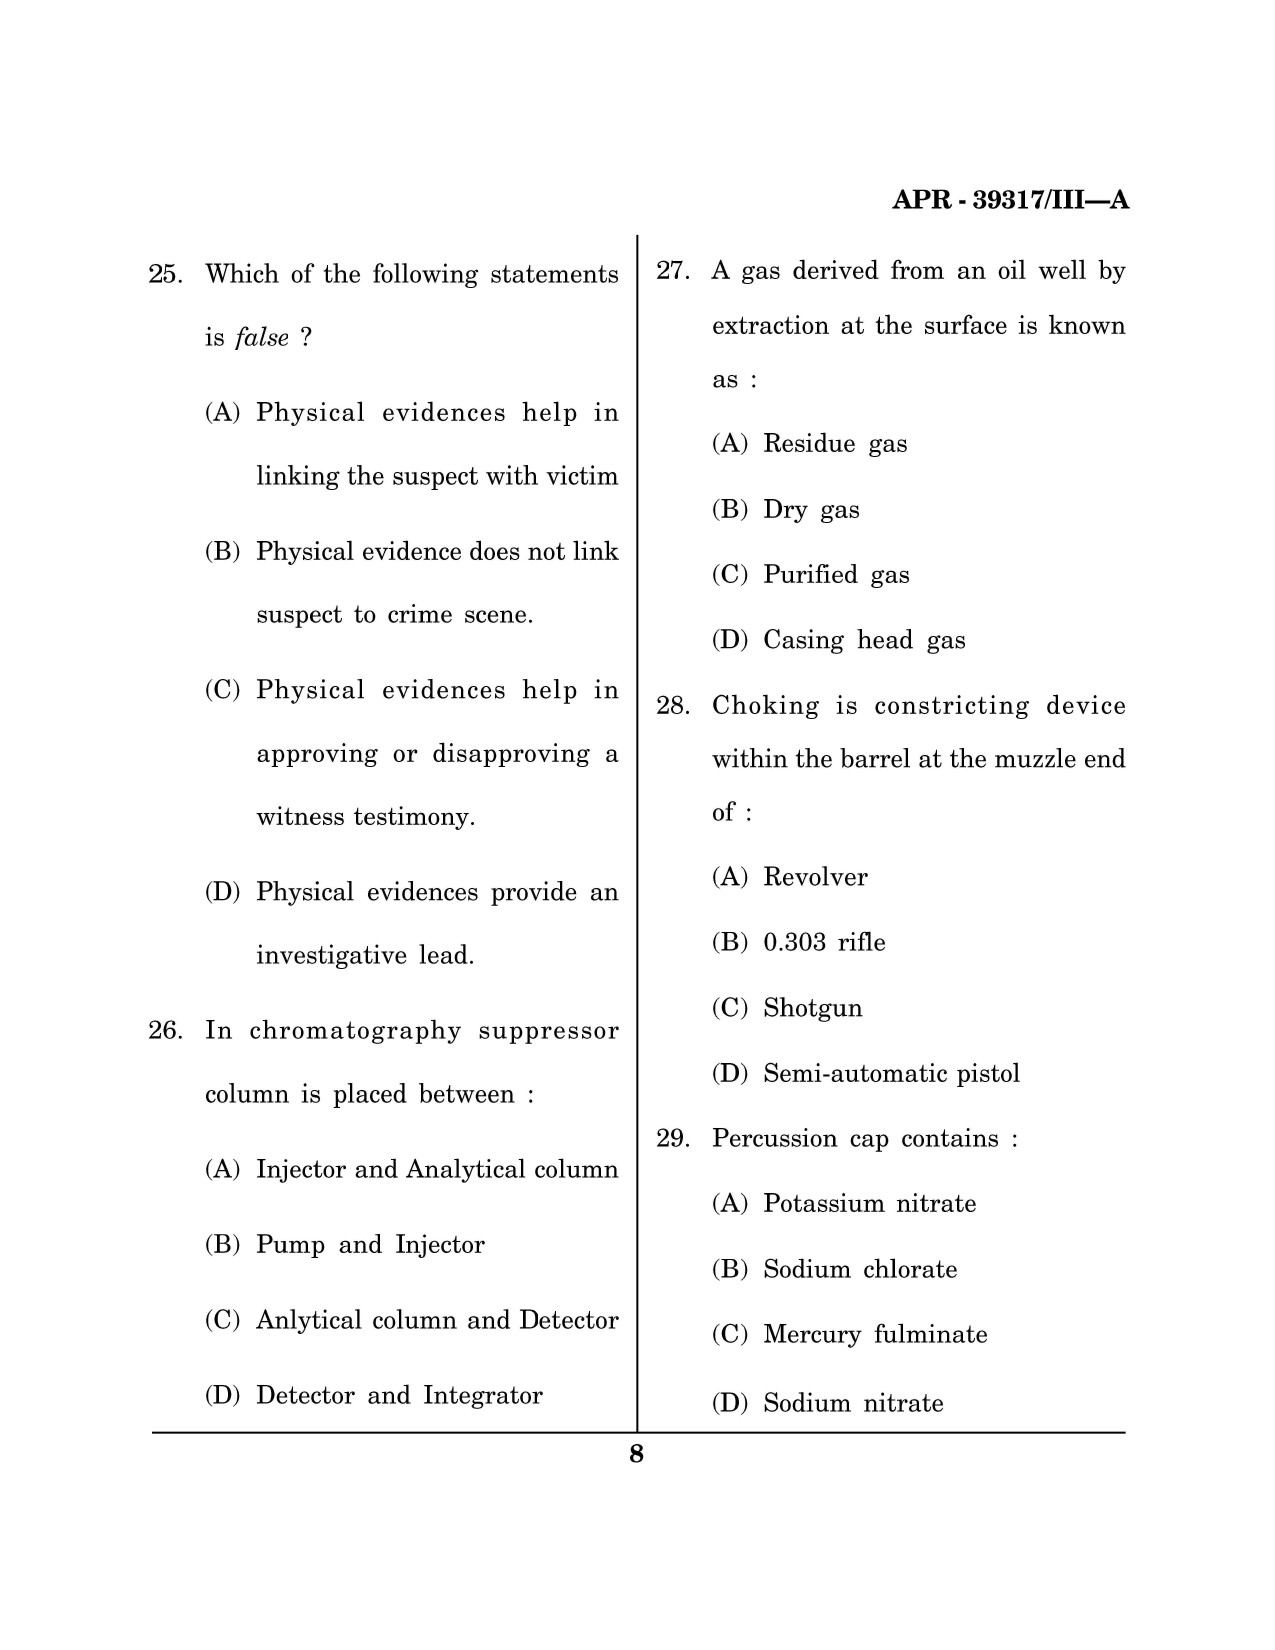 Maharashtra SET Forensic Science Question Paper III April 2017 7